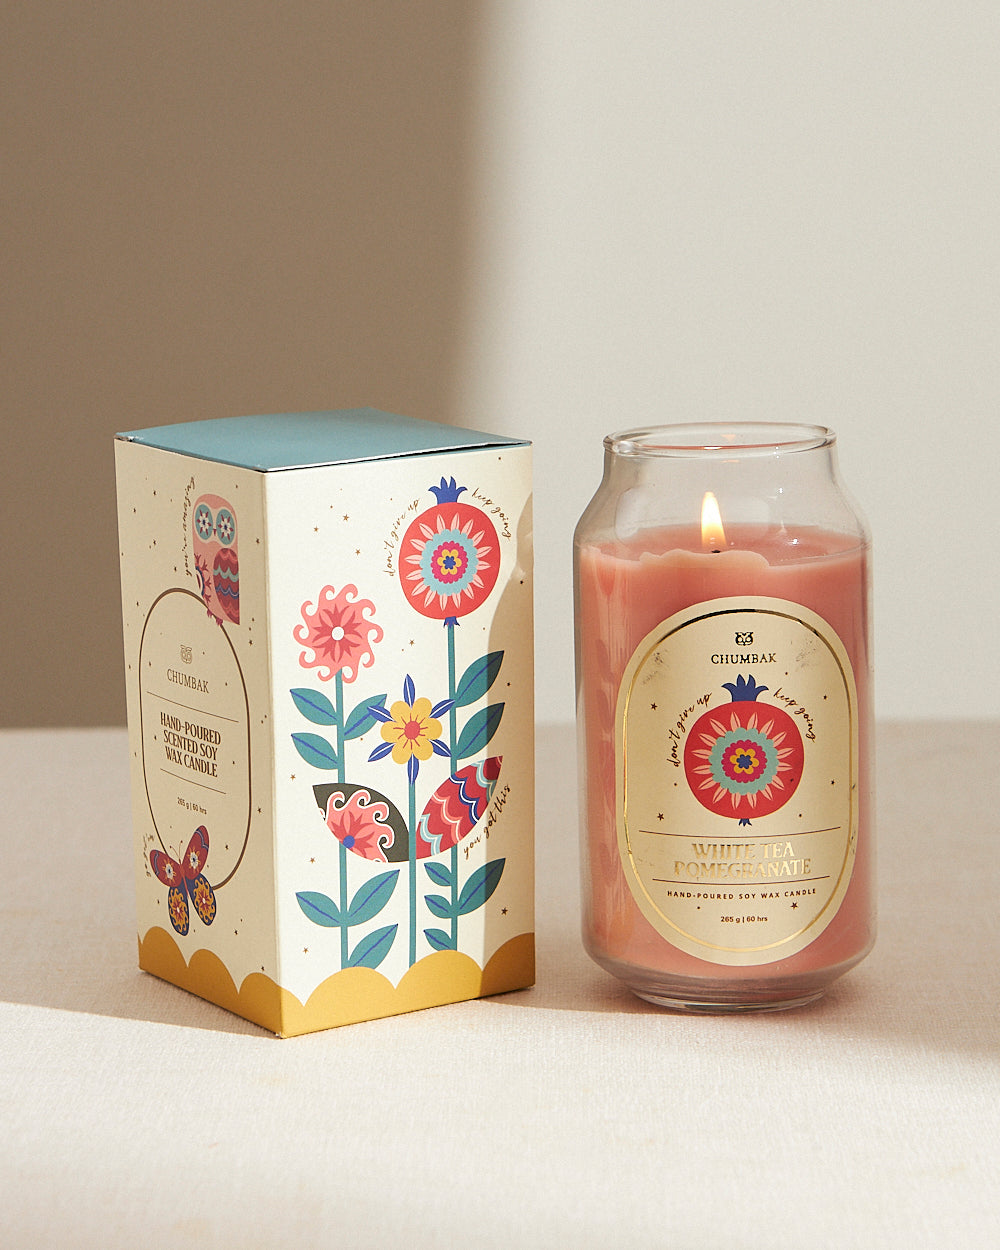 White Tea & Pomegranate Soy Wax Candle, 265g